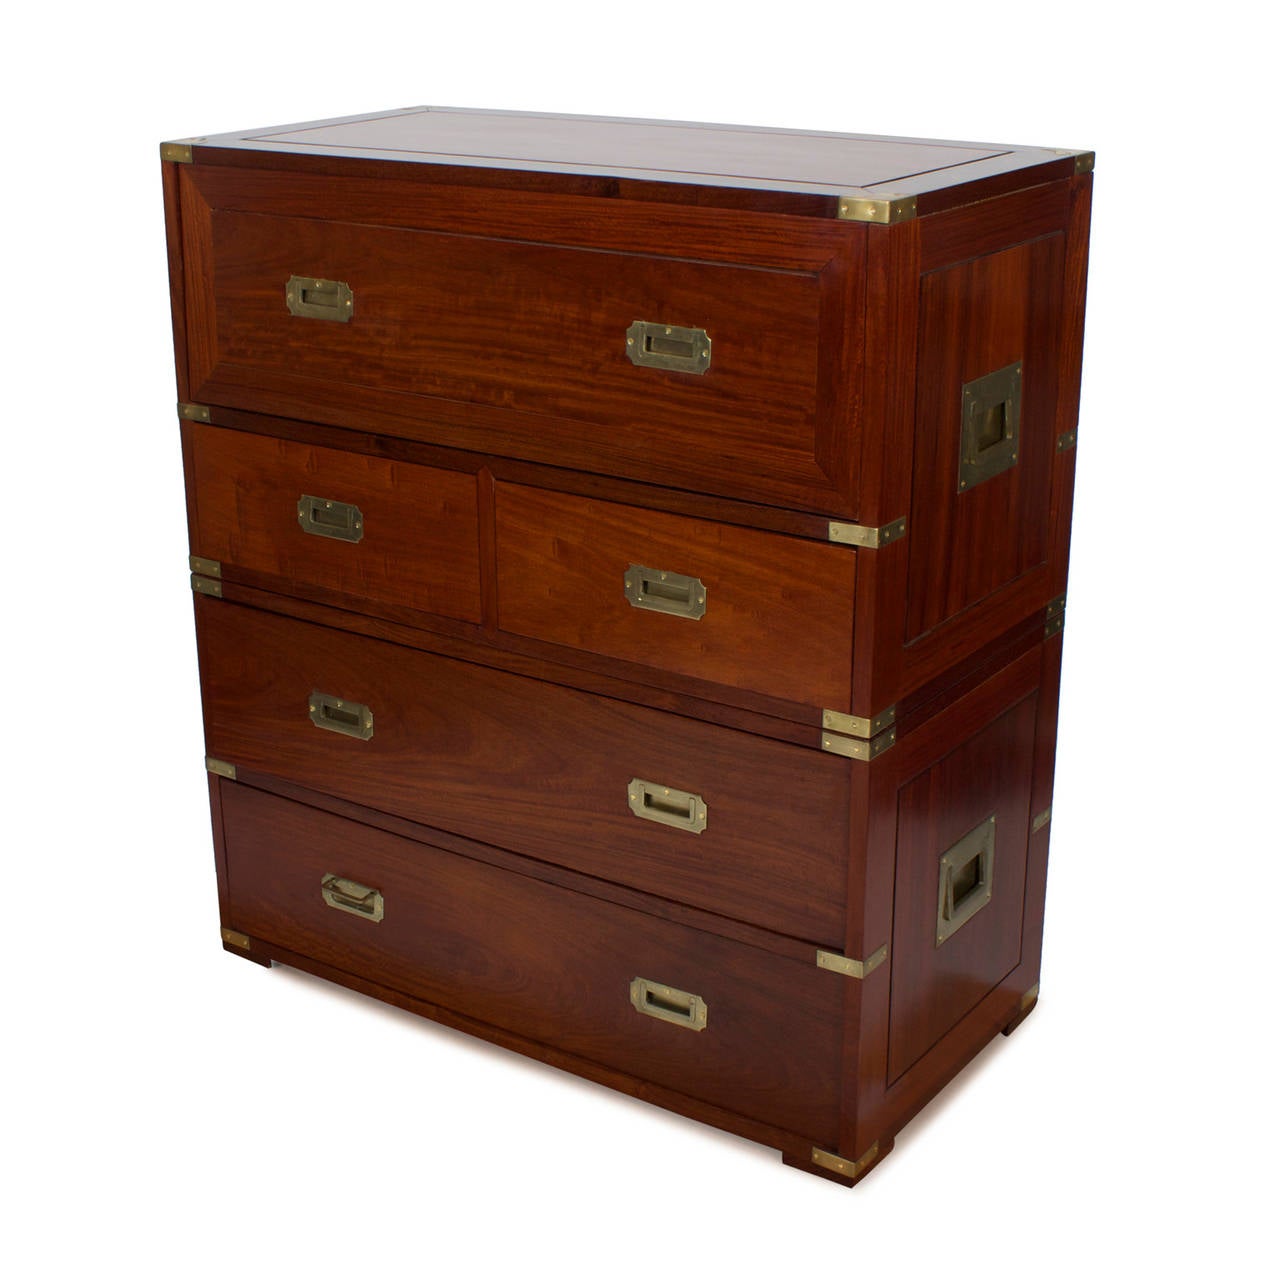 A rare vintage modern take on a Campaign secretary chest with a drop down top drawer exposing four drawers and numerous cubby holed interior with four storage drawers below. Made of mahogany with solid brass inset hardware, and a high quality drop